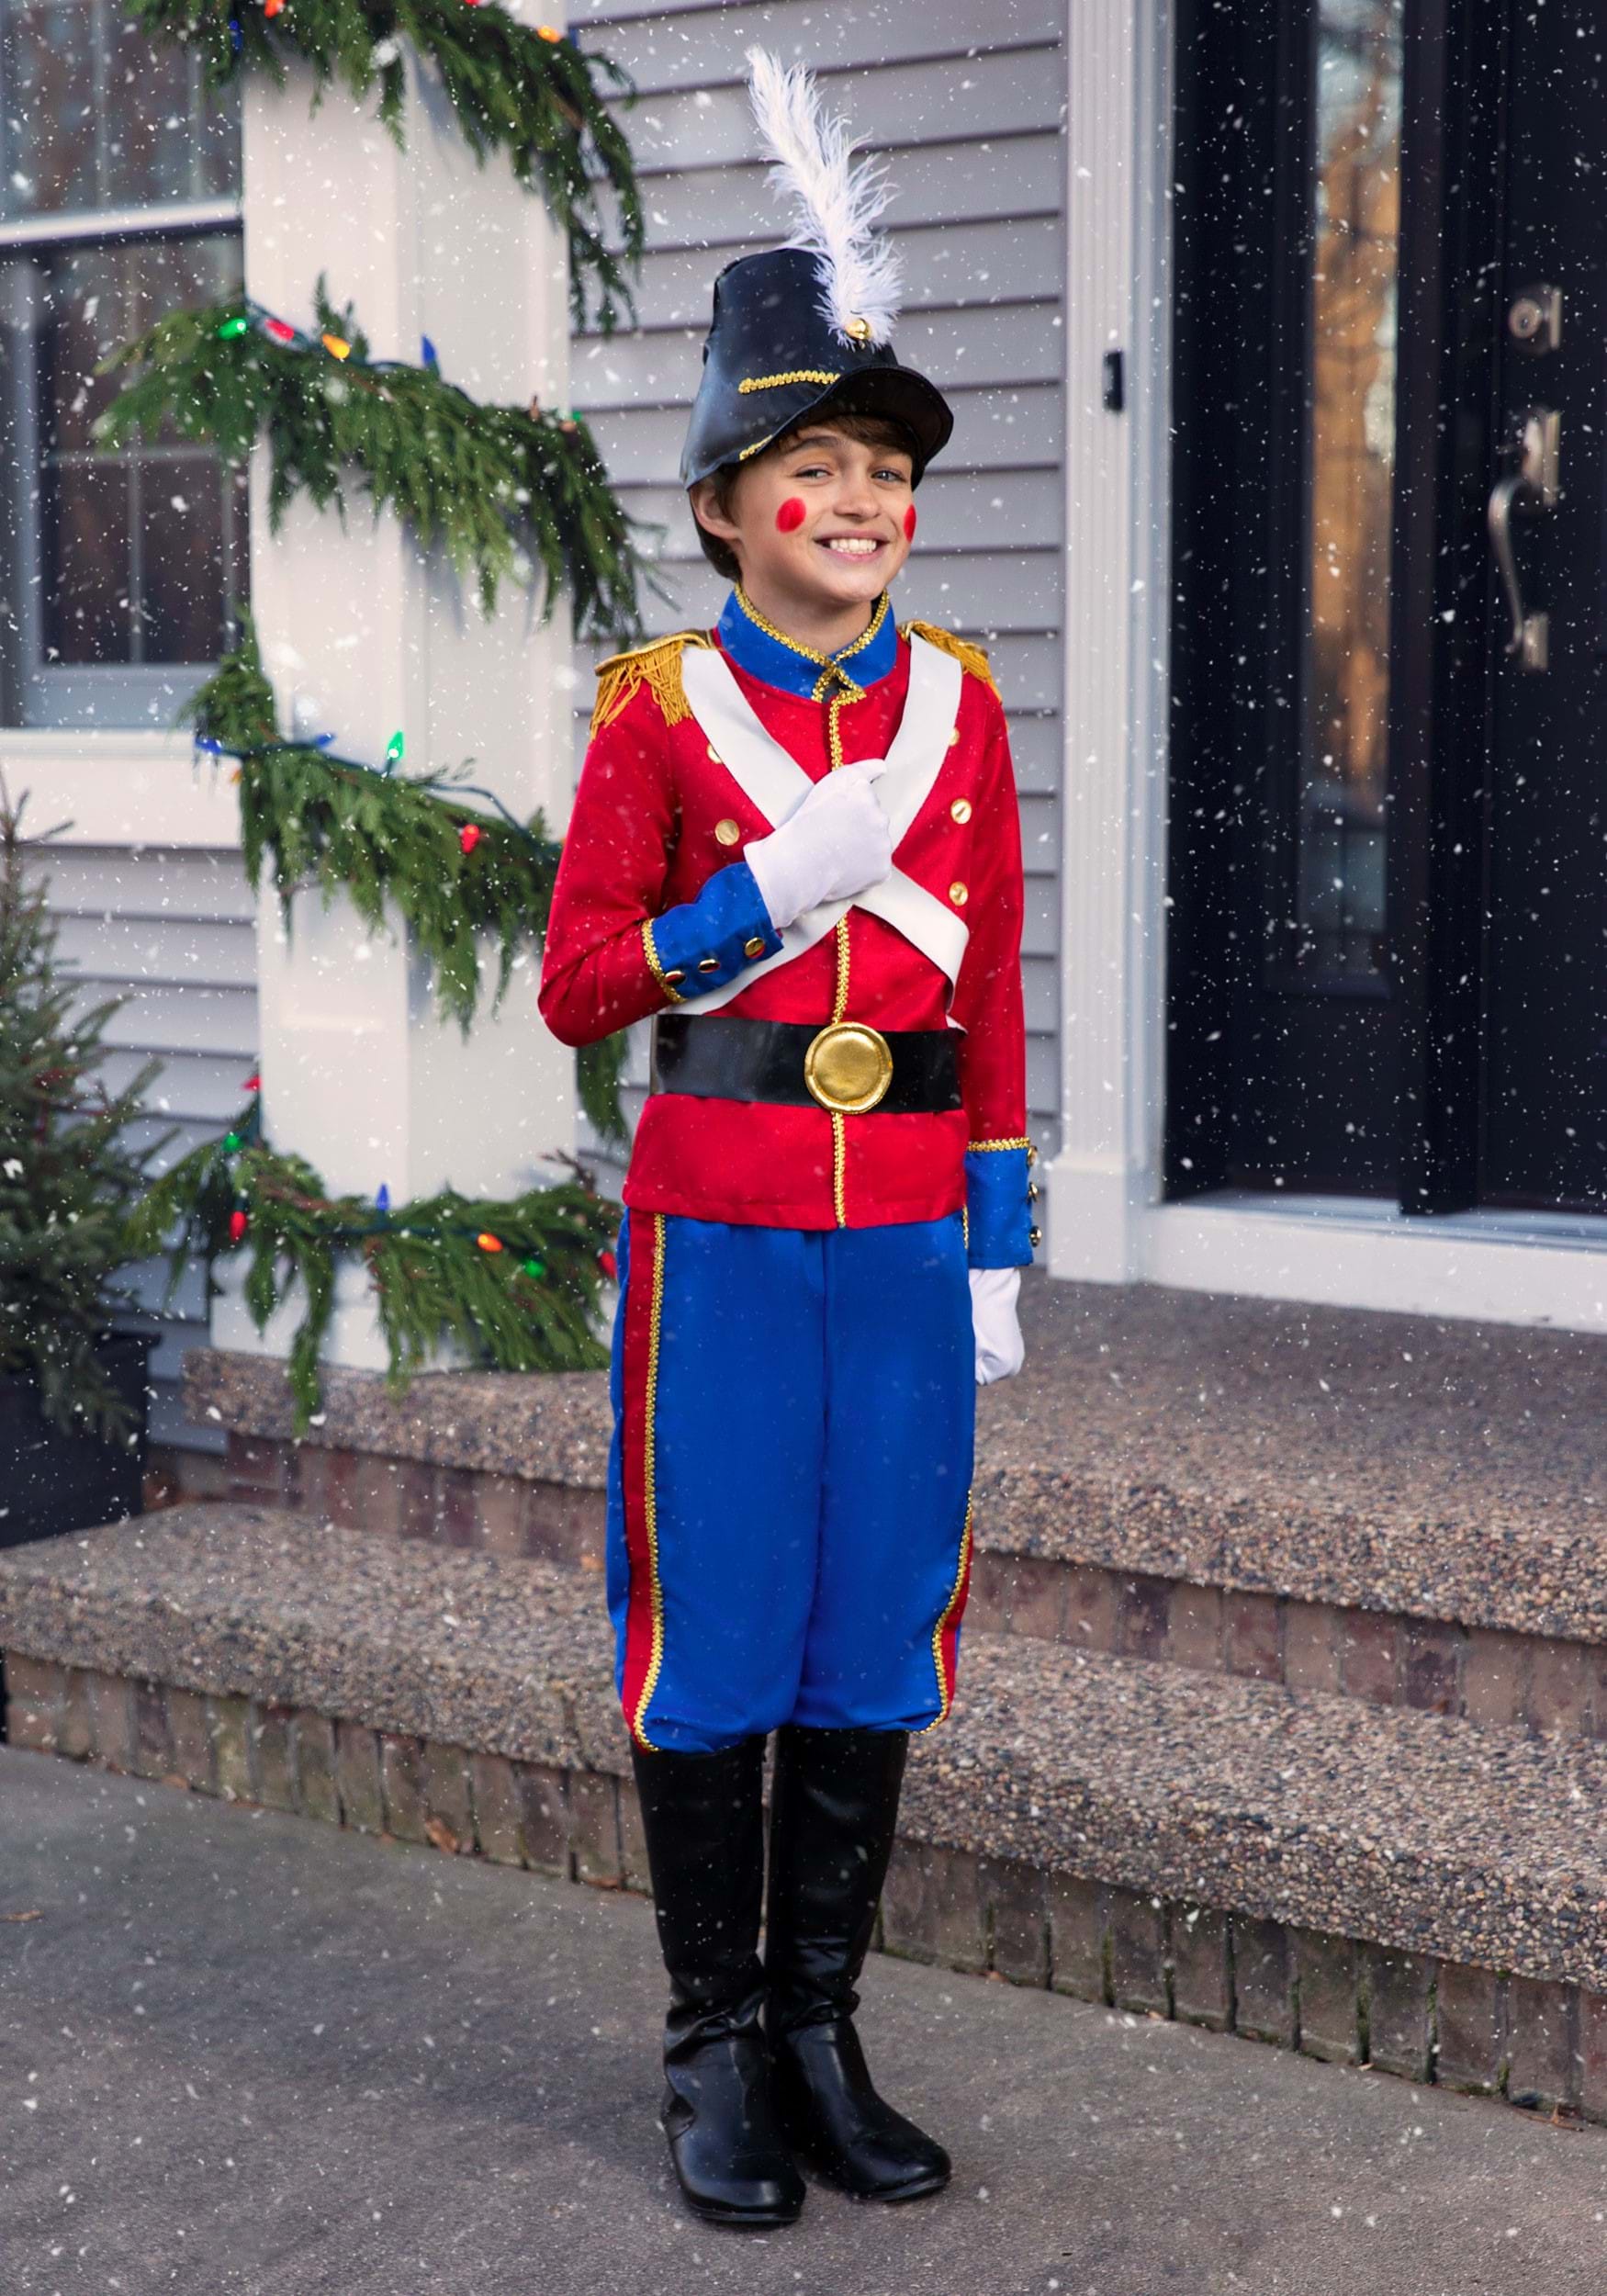 https://images.halloweencostumes.com/products/45246/1-1/boys-toy-soldier-costume-2.jpg